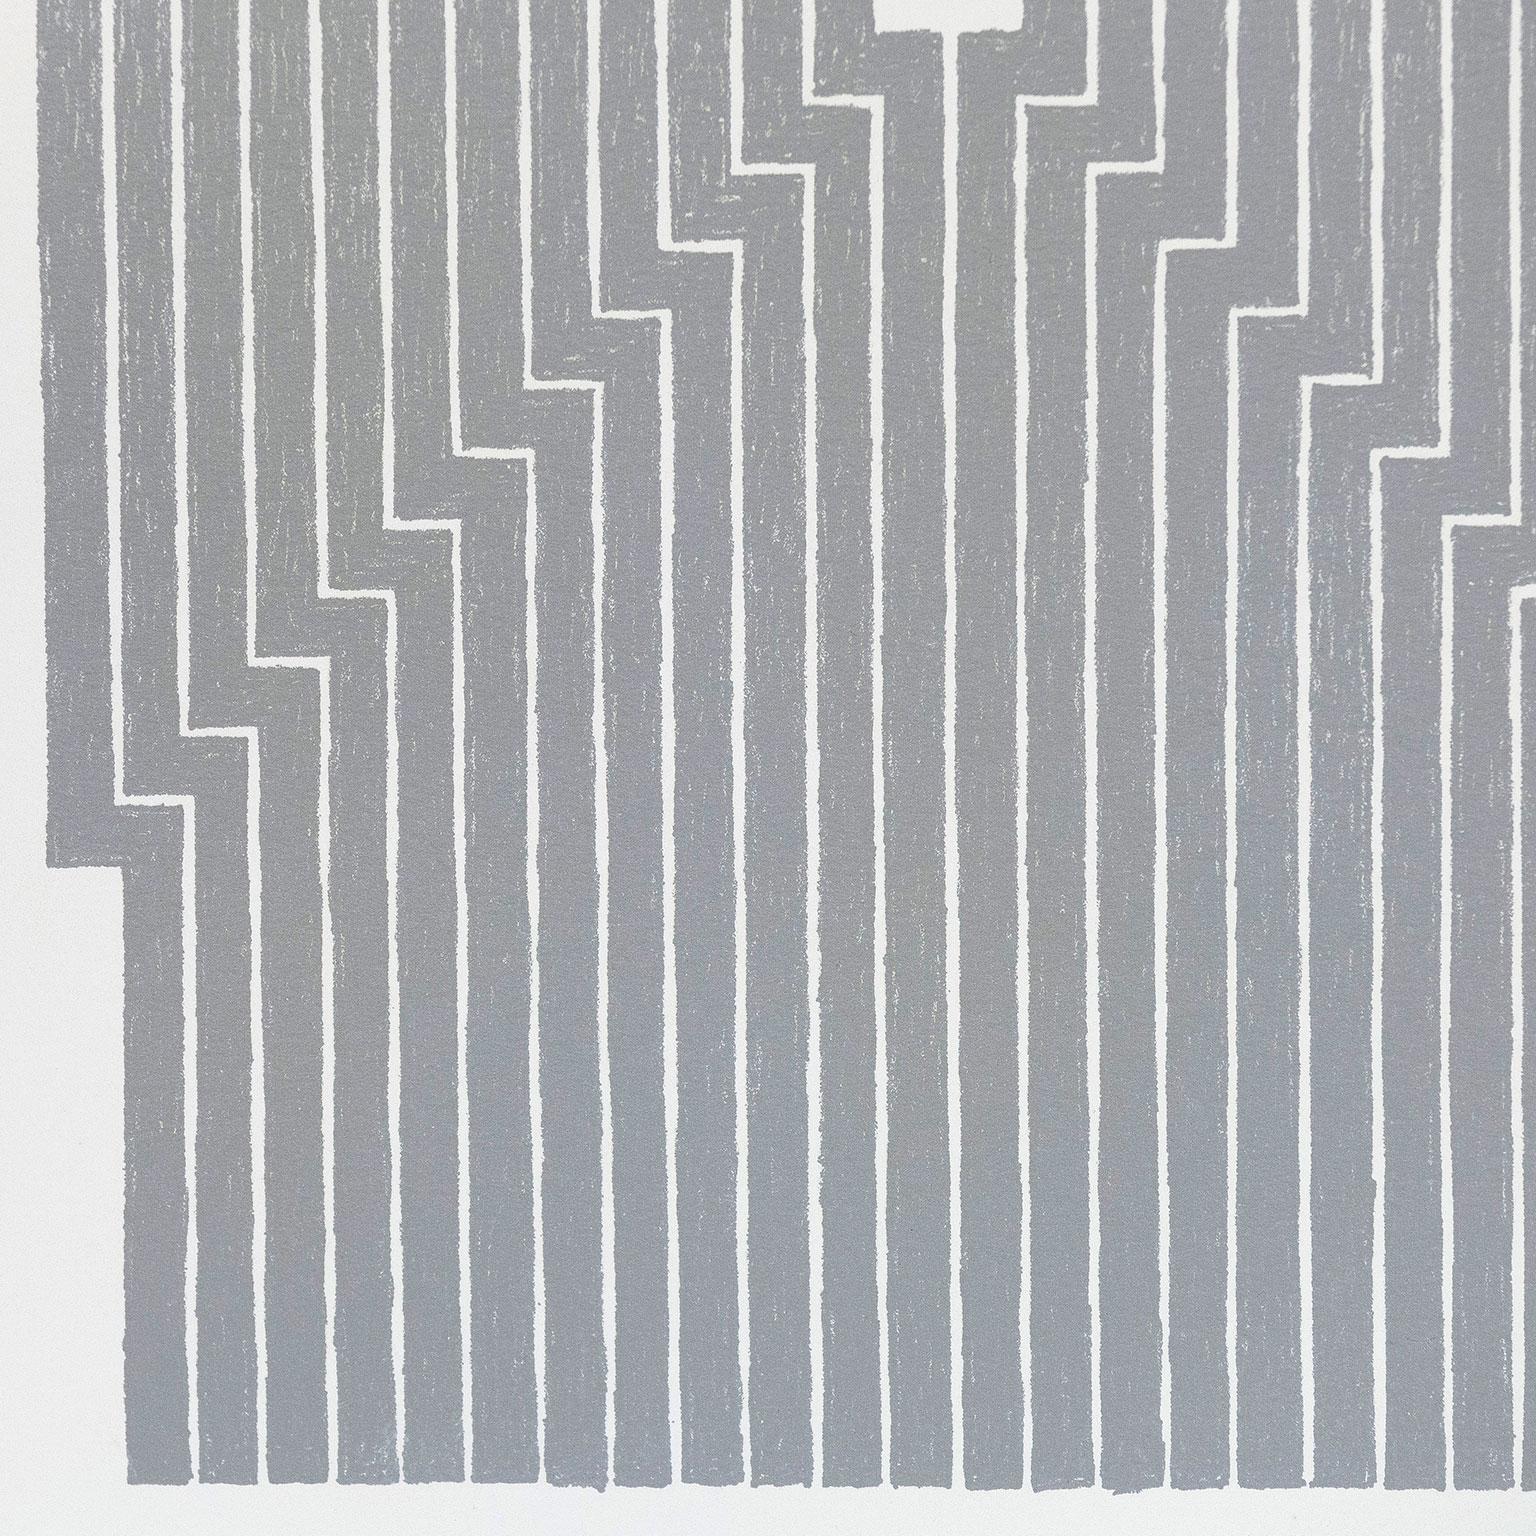 This fantastic minimal and mesmerizing Frank Stella print relates to one his most famous works, now in the permanent collection of the Tate Modern (London).

The hypnotic form was first realized in the canvas of 